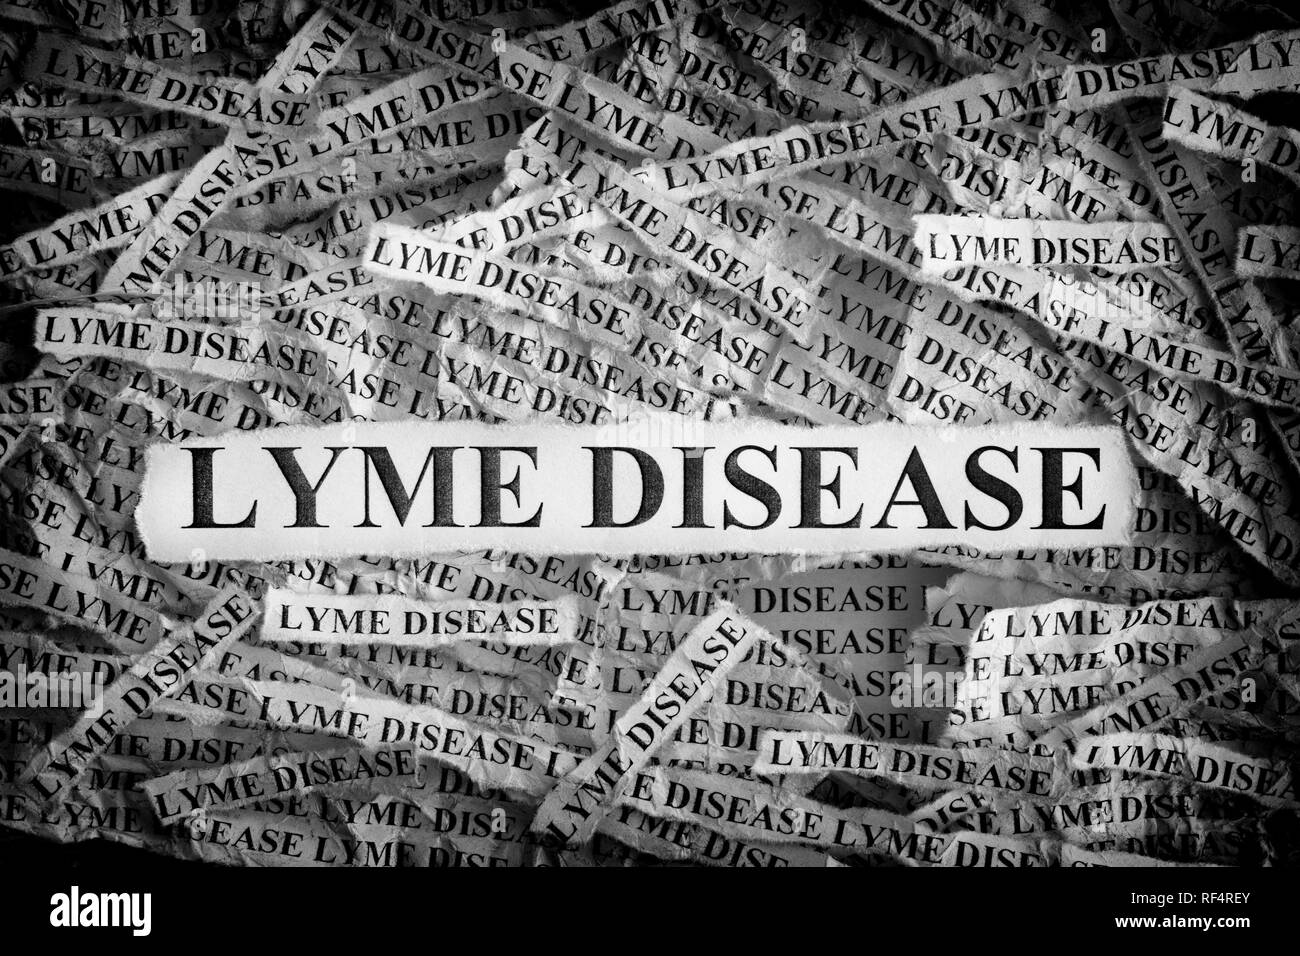 Lyme Disease. Torn pieces of paper with the words Lyme Disease. Concept image. Black and White. Close up. Stock Photo